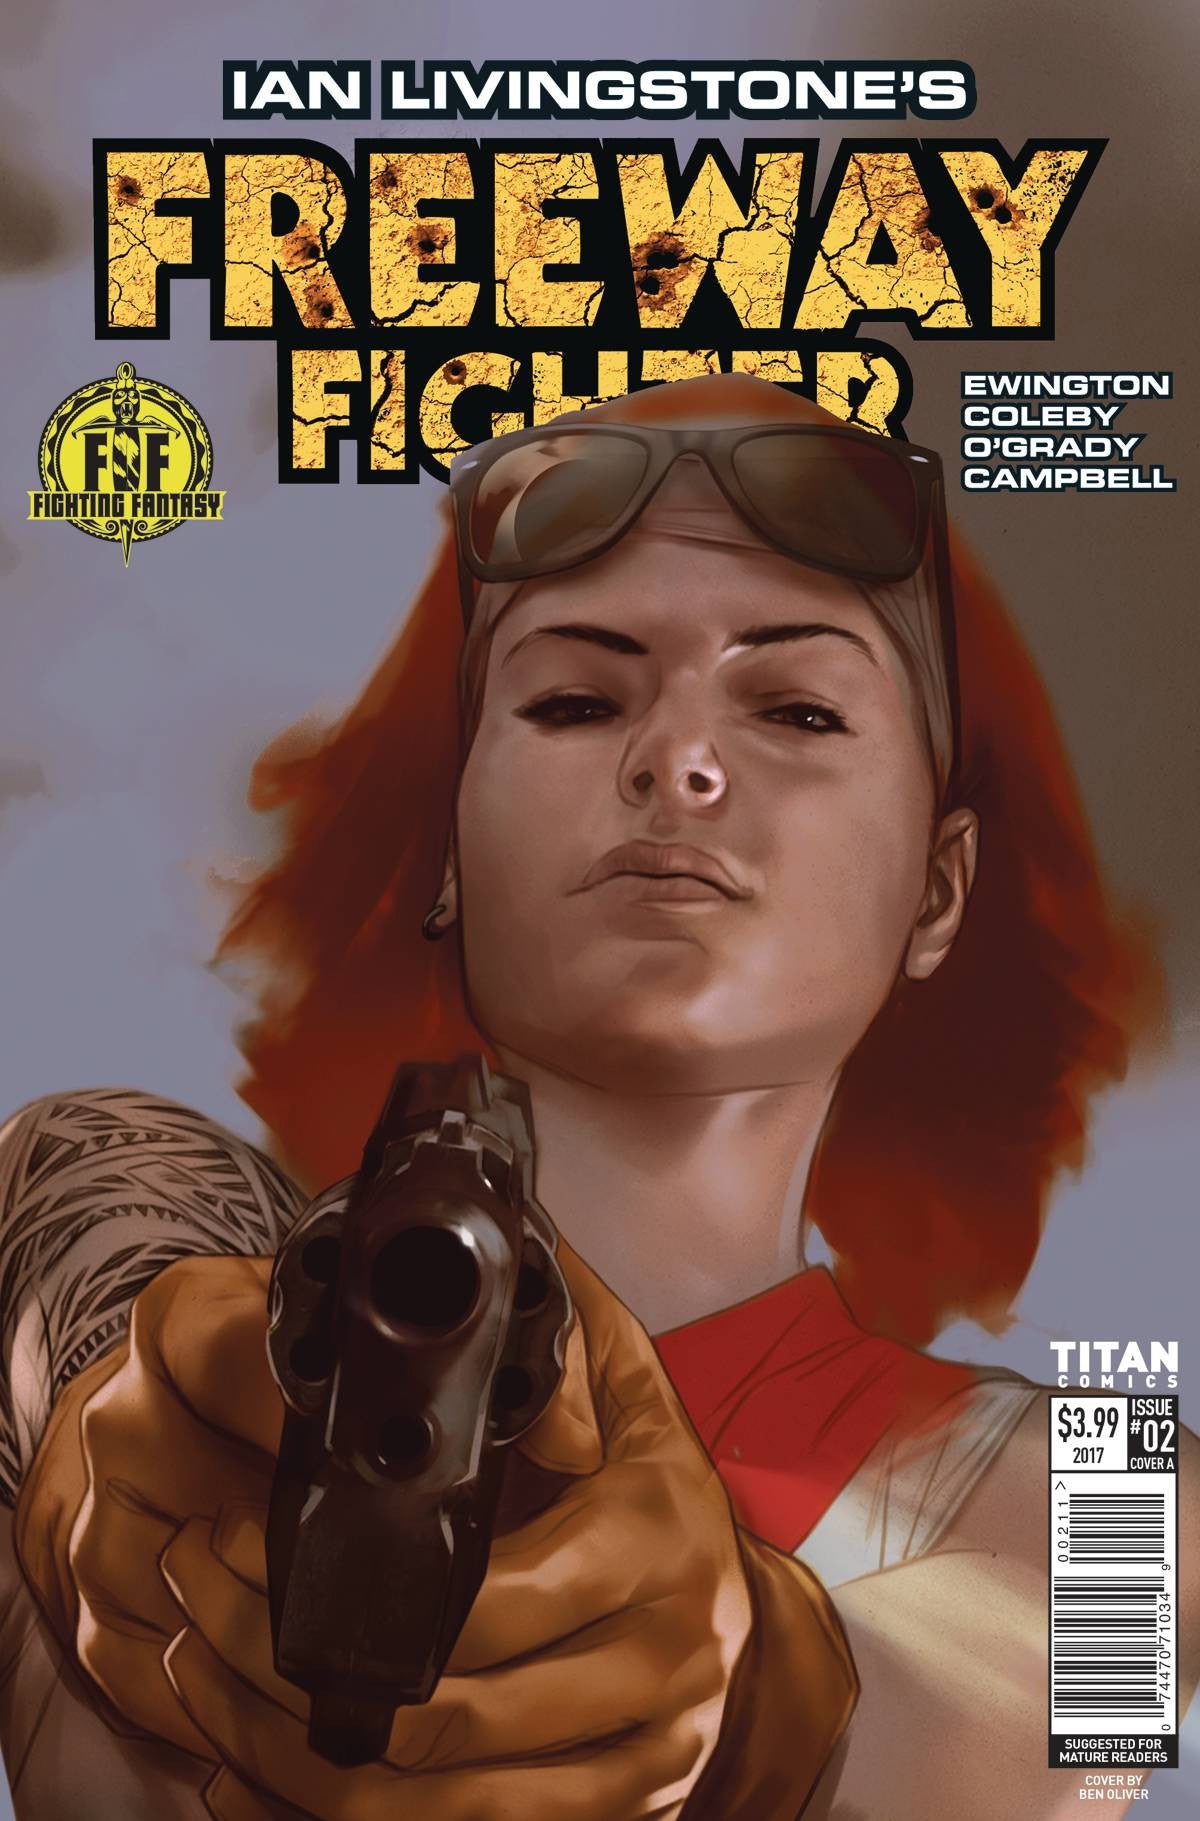 IAN LIVINGSTONE FREEWAY FIGHTER #2 (OF 4) CVR A OLIVER COVER